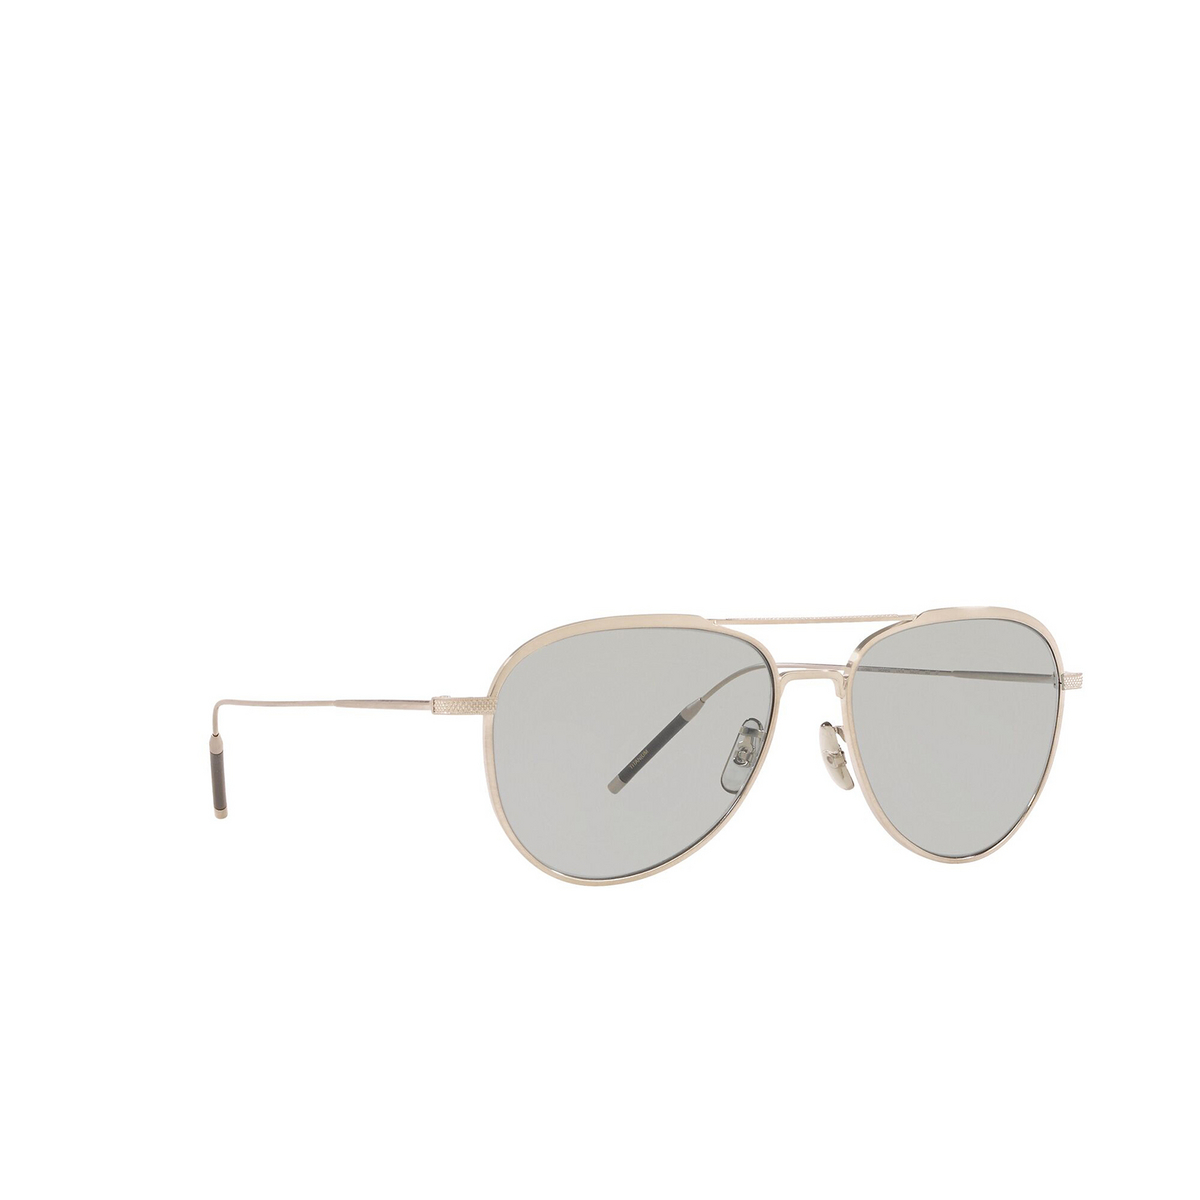 Oliver Peoples TK-3 Sunglasses 5254R5 Brushed Silver - three-quarters view